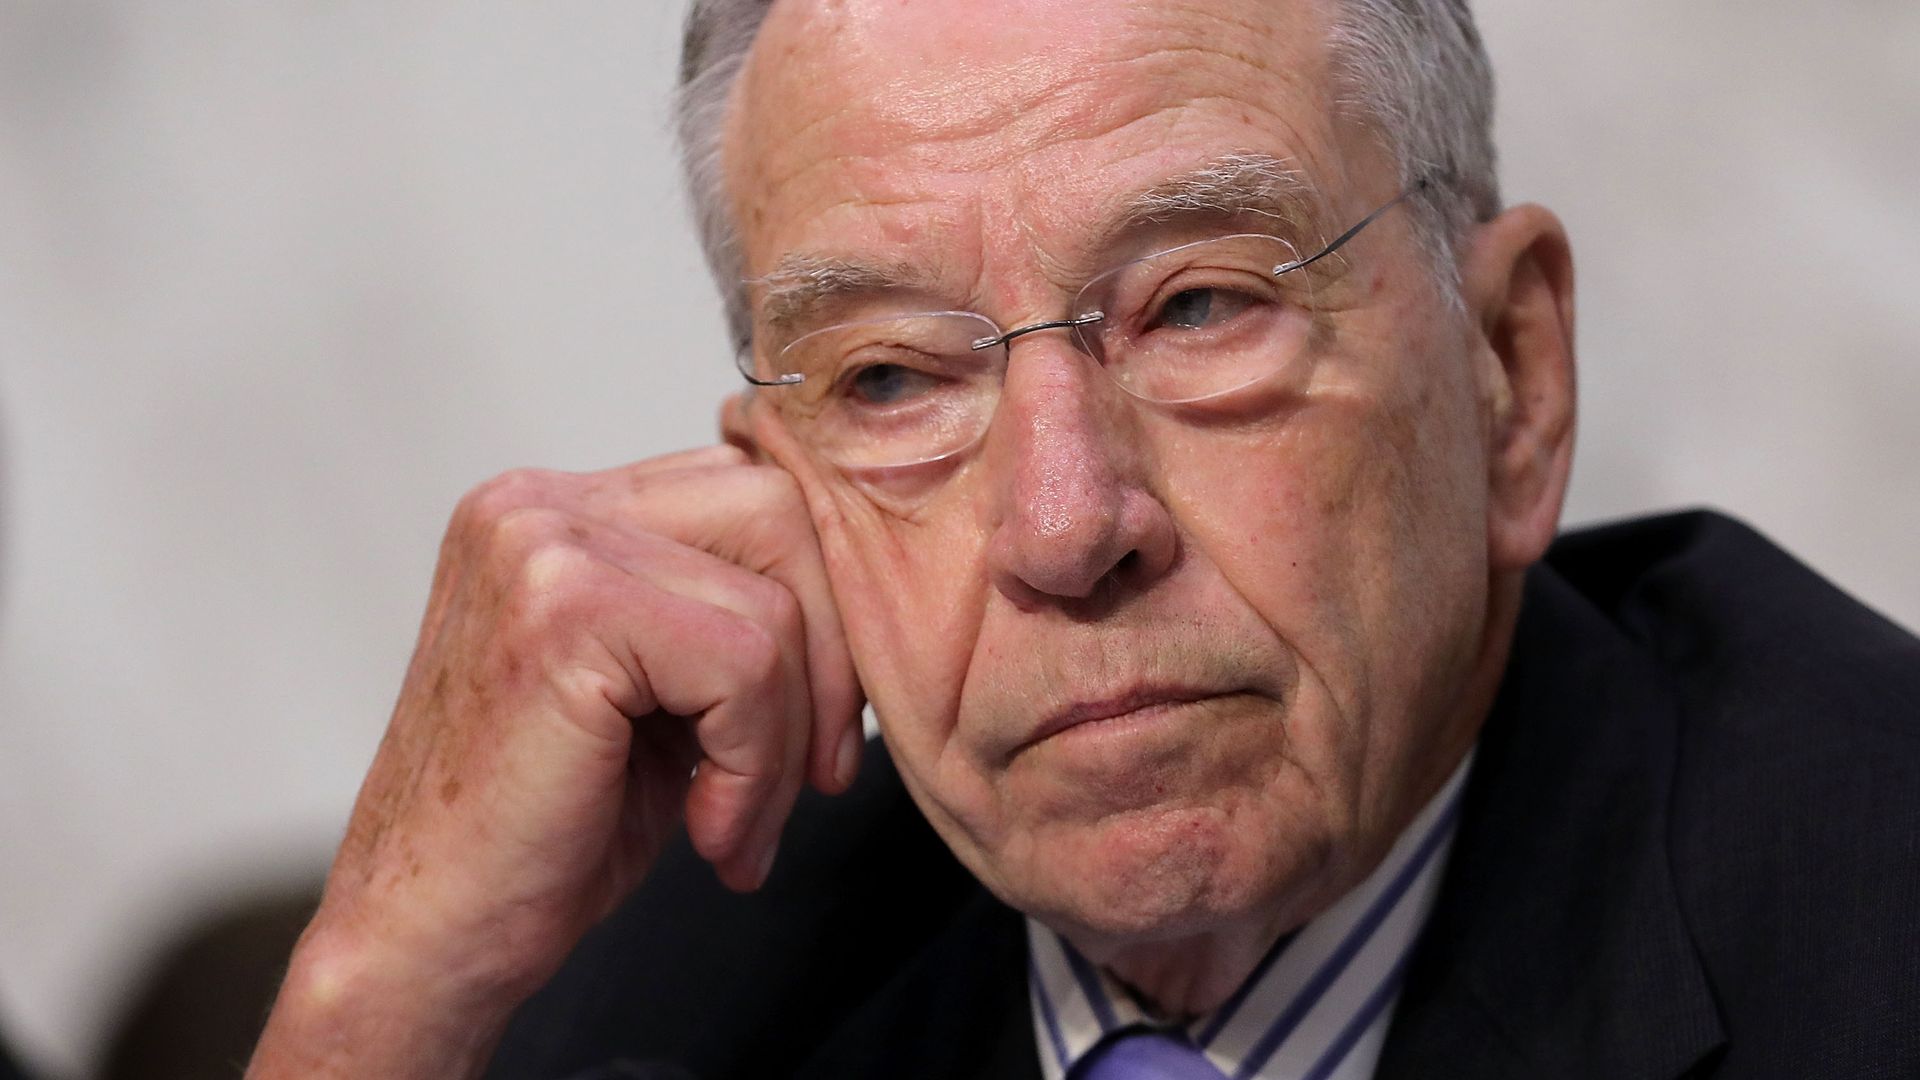 Chuck Grassley rests his head on his hand while in thought